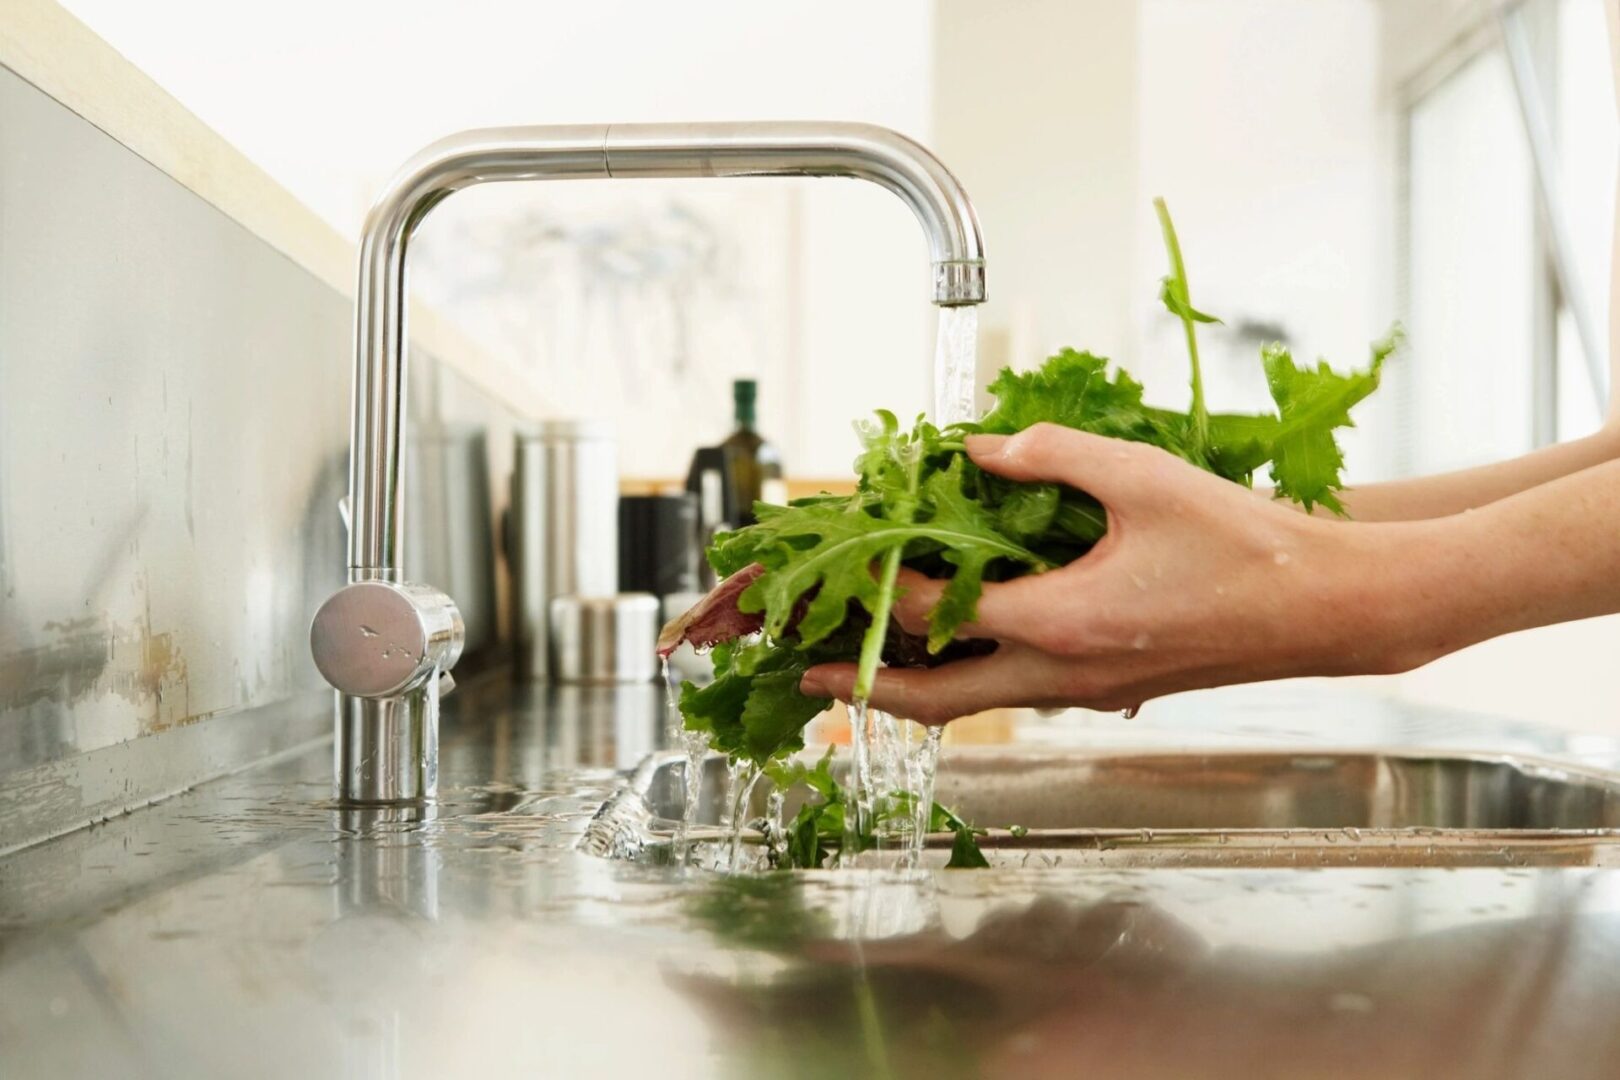 A person washing vegetables in the sink.